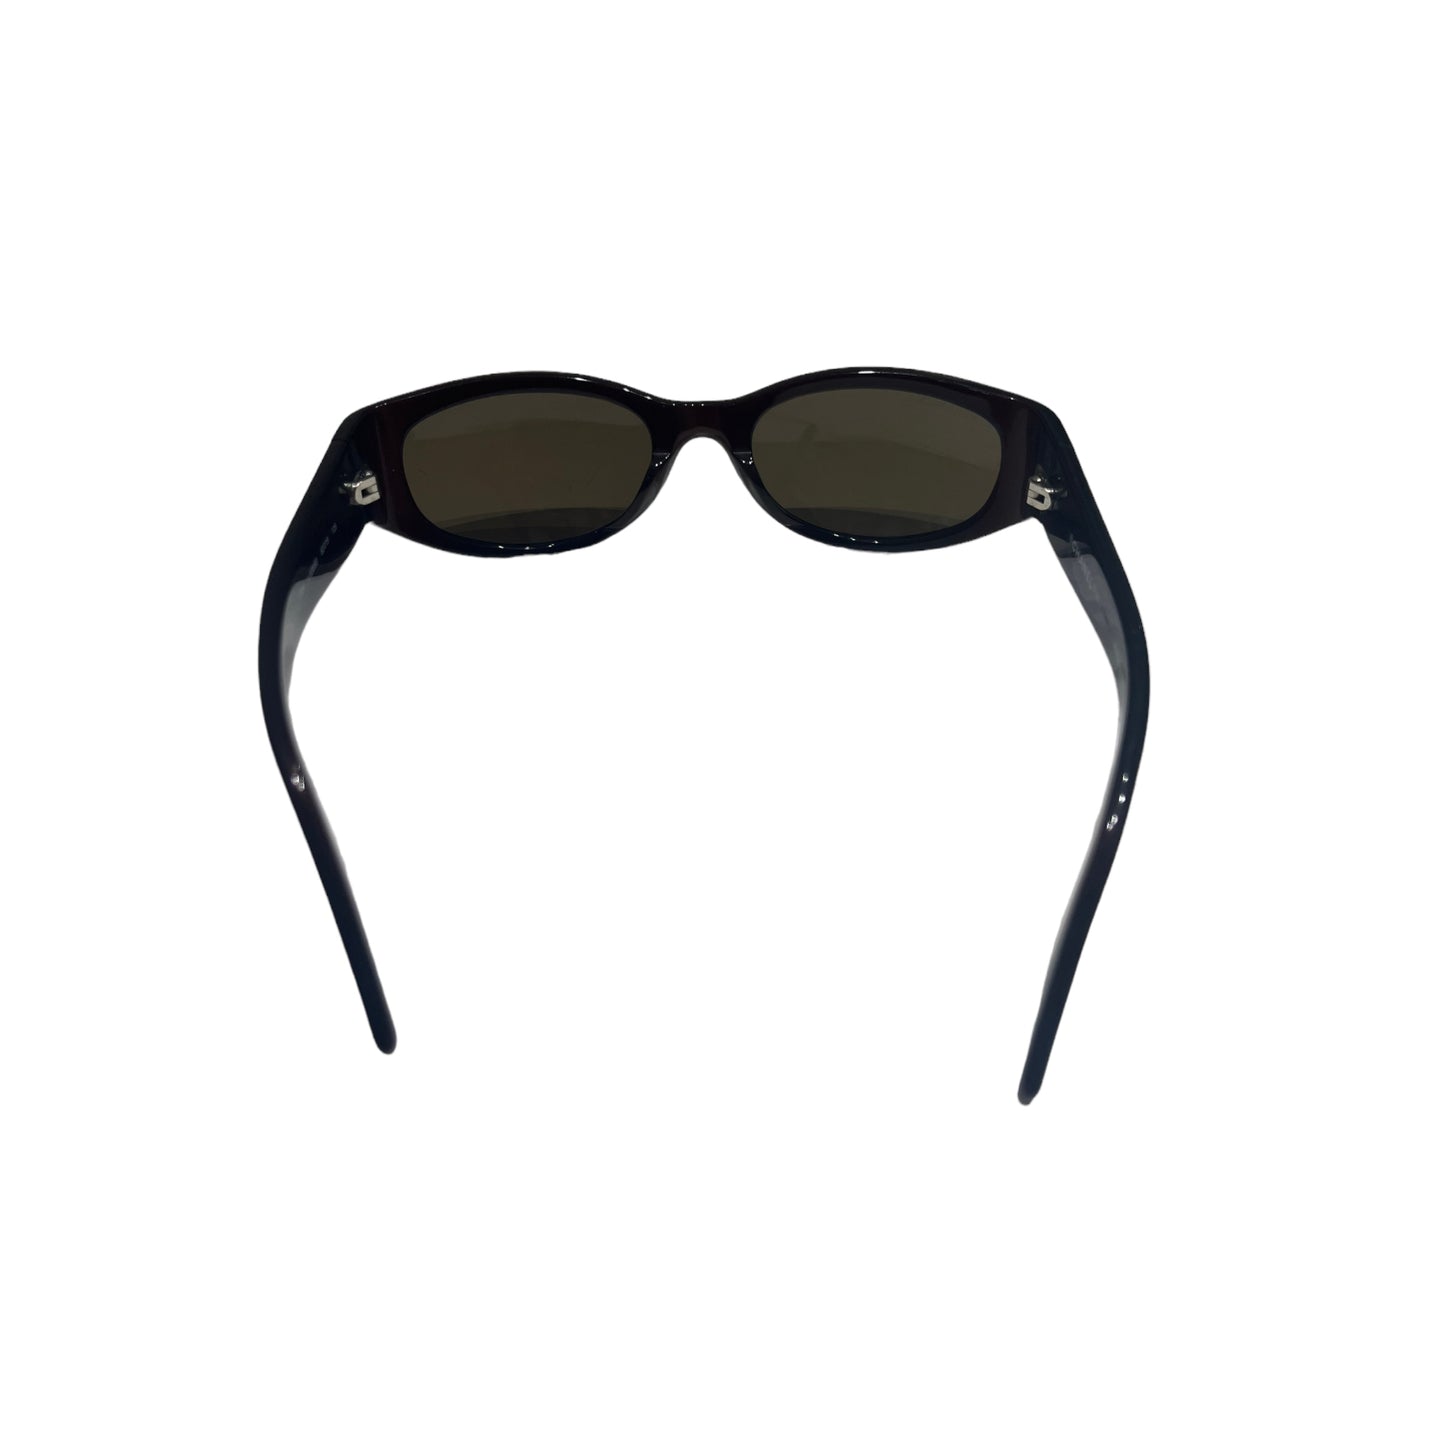 Chanel Rounded Oval Sunglasses